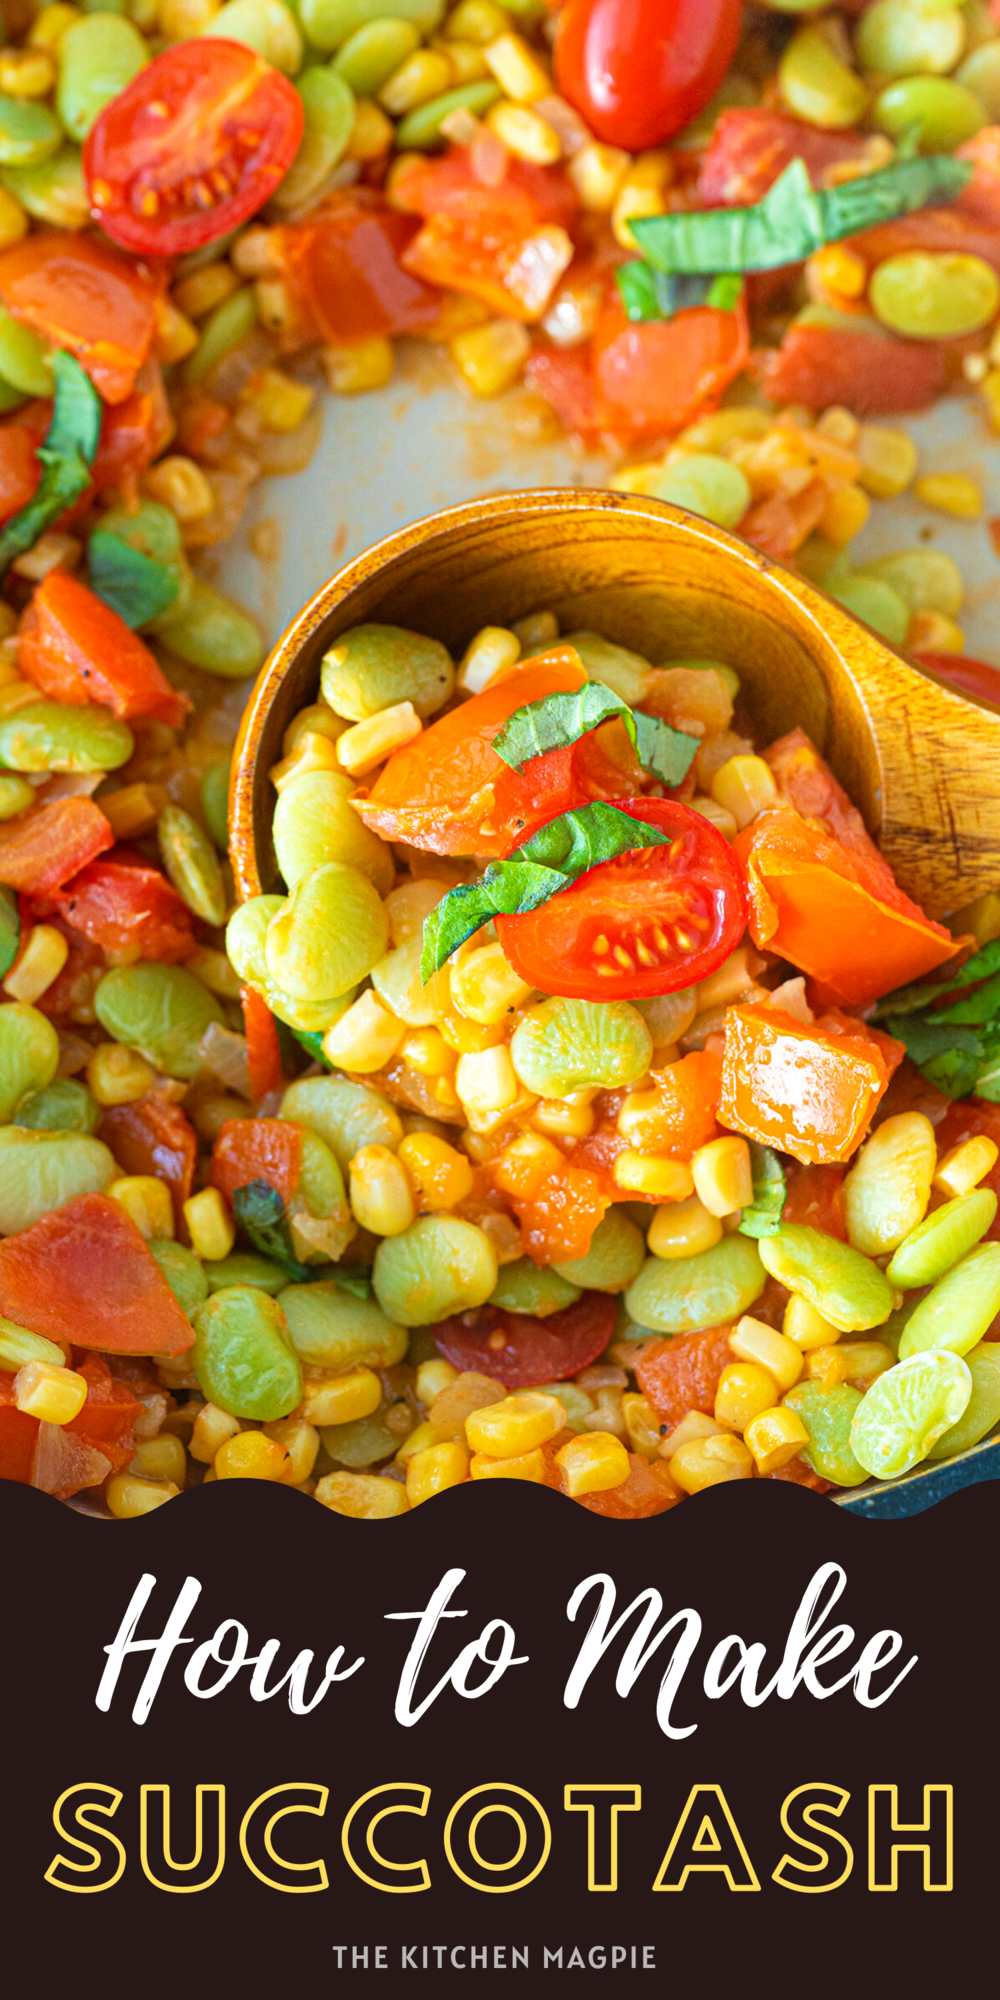 This simple succotash is a classic combination of corn, lima beans and tomatoes cooked together. The perfect simple dish that makes the best of fresh produce.